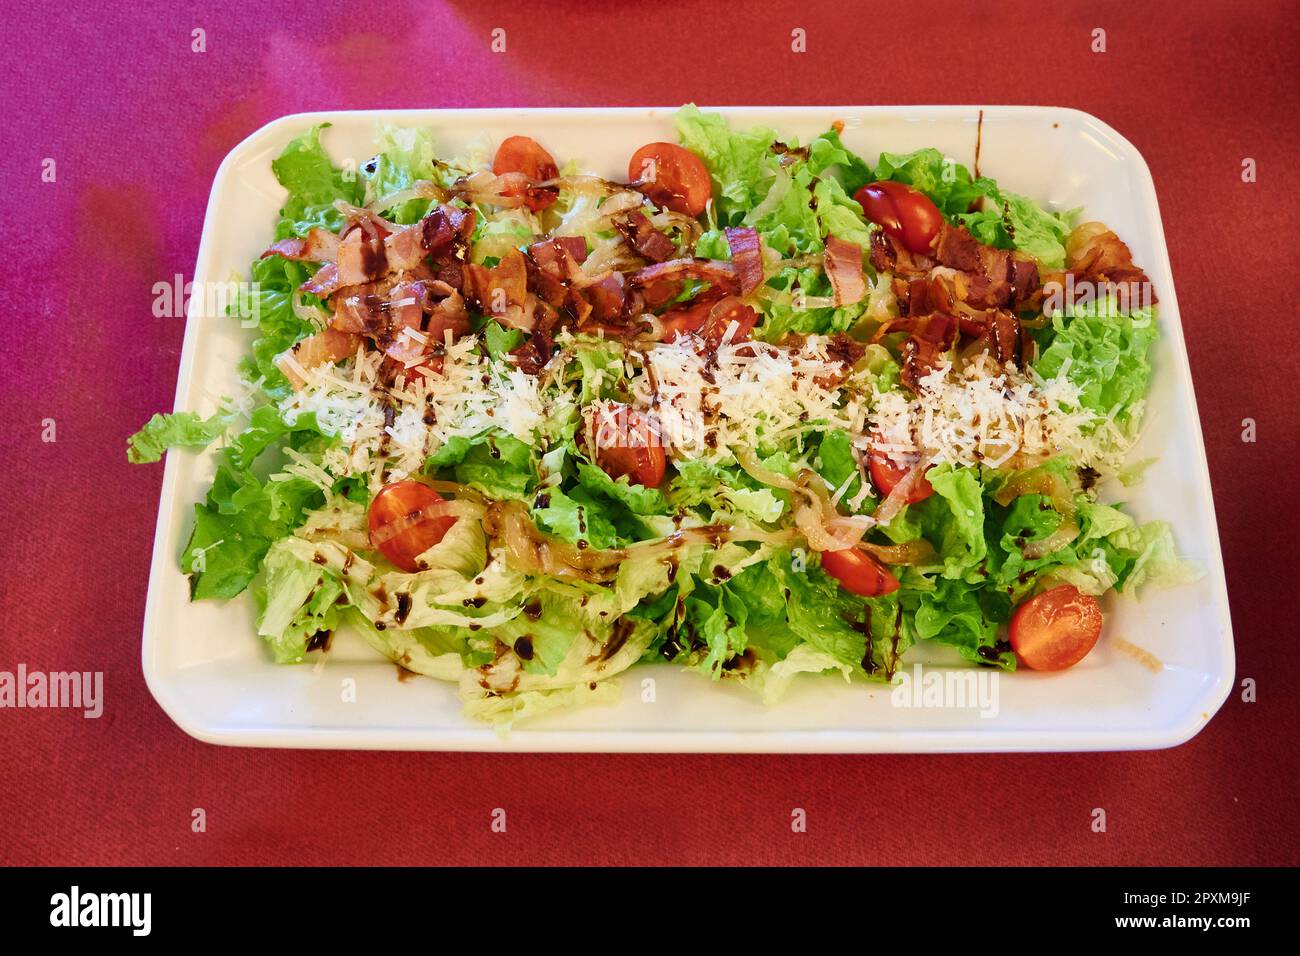 Salad with cheese, bacon, caramelized onion, tomato and lettuce dressed with Modena vinegar Stock Photo